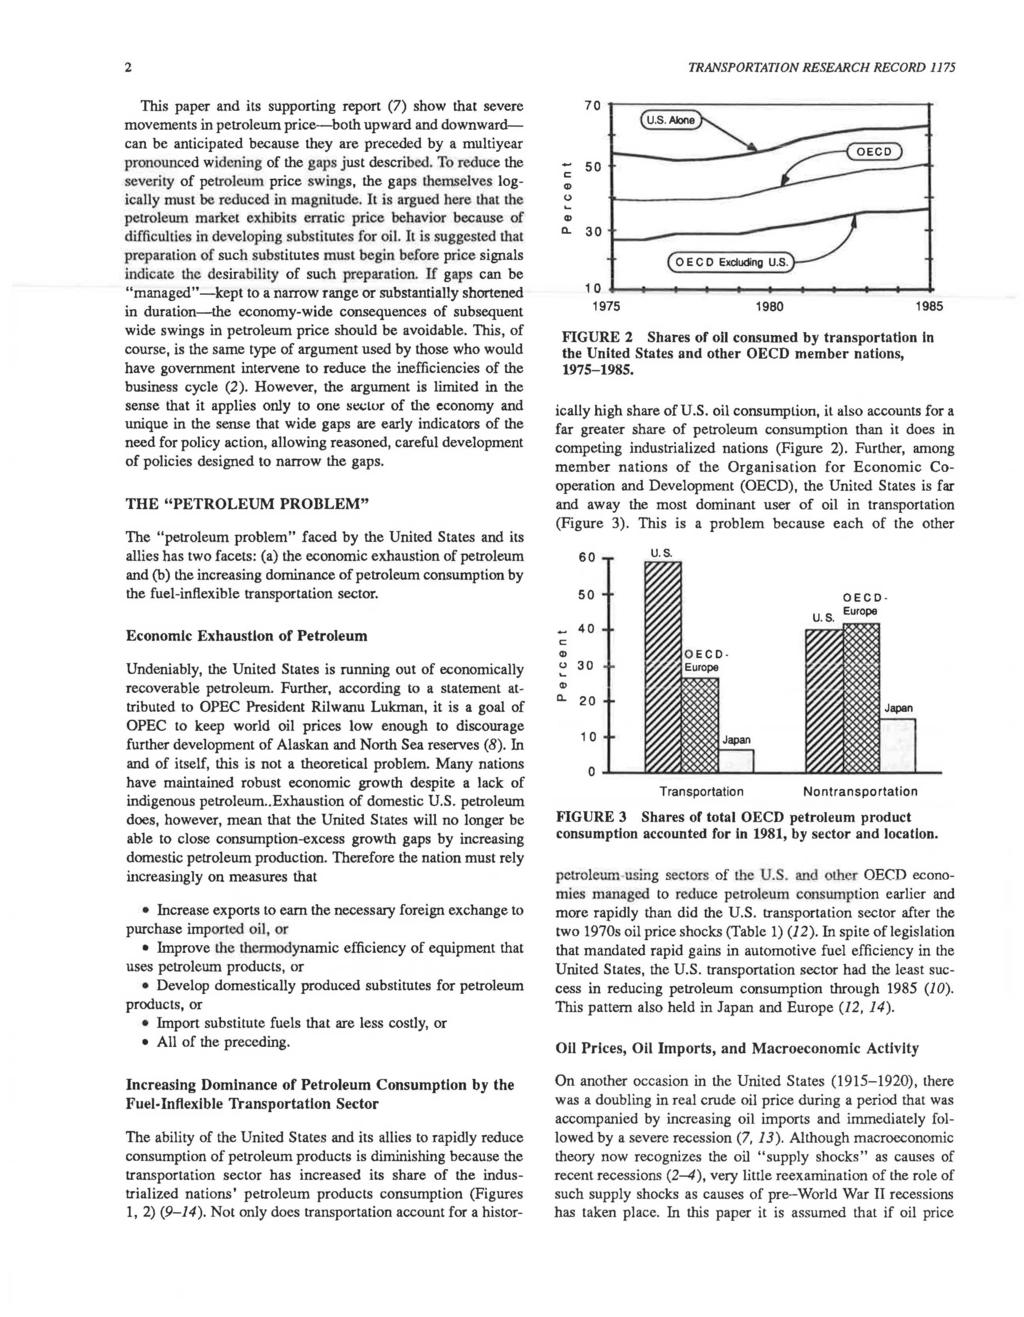 2 This paper and its supporting report (7) show that severe movements in petroleum prie-both upward and downwardan be antiipated beause they are preeded by a multiyear pronouned widening of the gaps